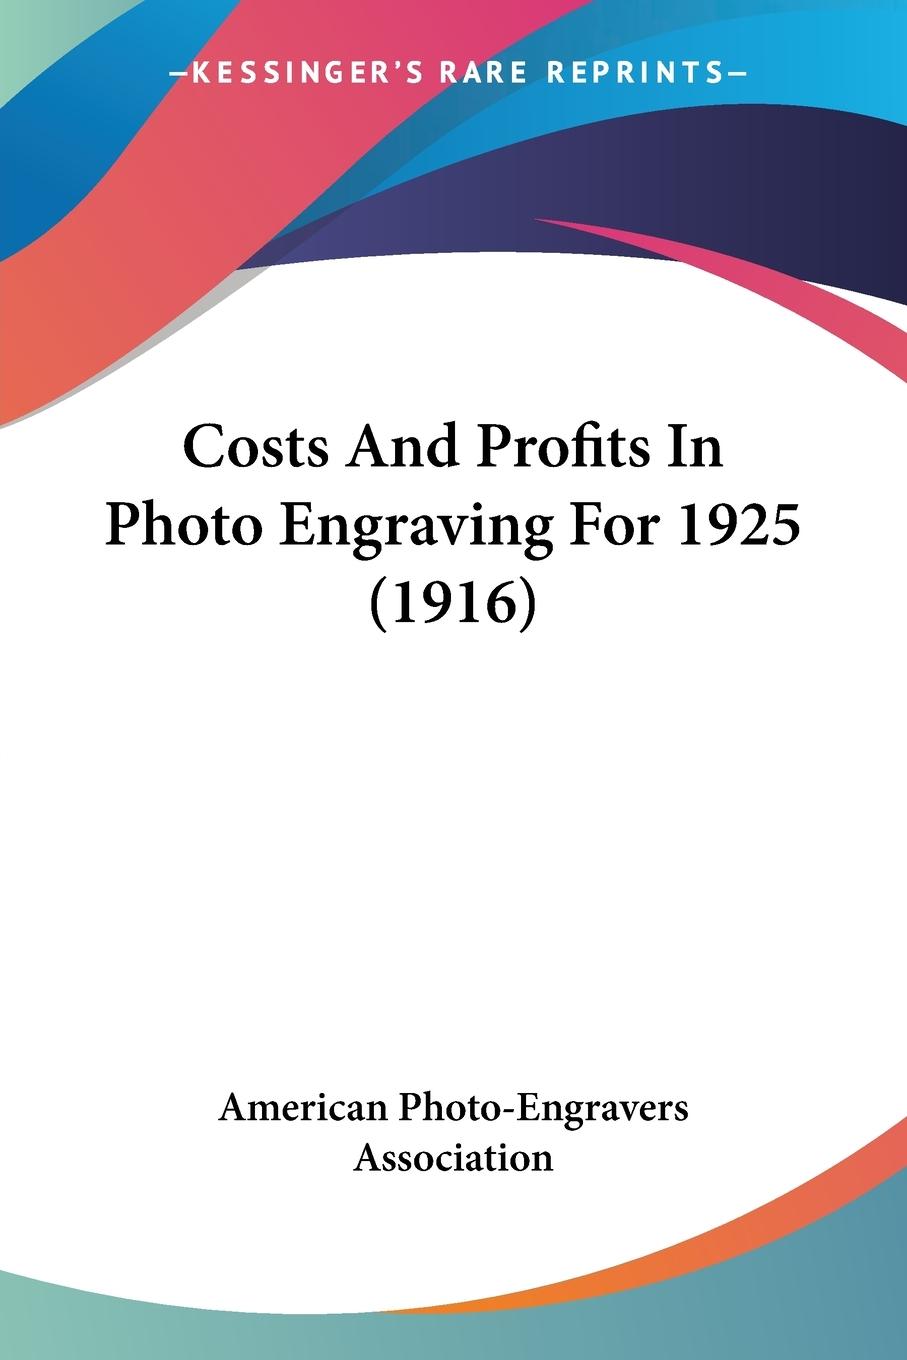 Costs And Profits In Photo Engraving For 1925 (1916) - American Photo-Engravers Association